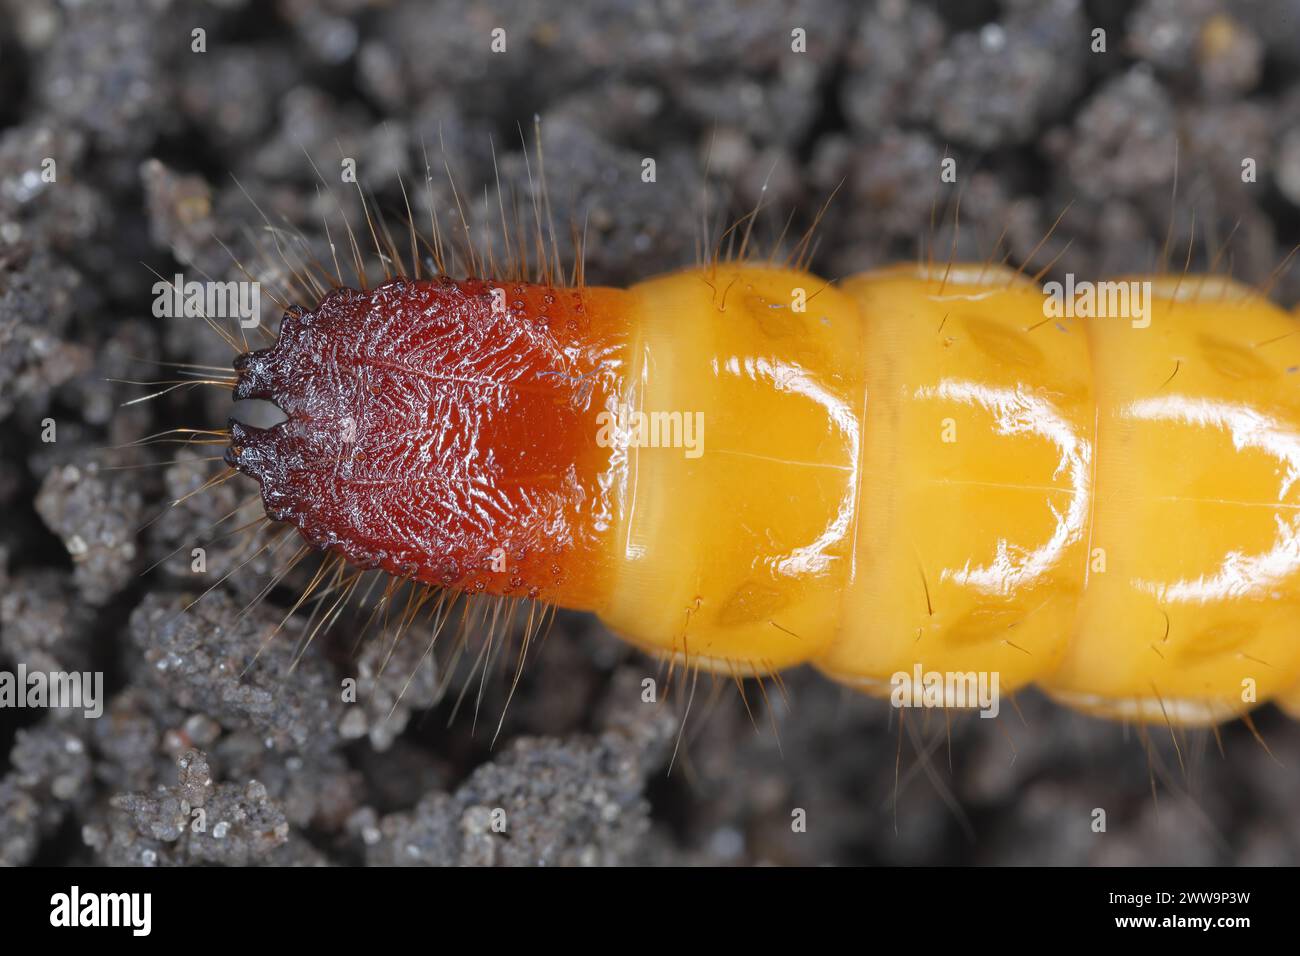 Wireworm, larva of Mouse grey Click Beetle (Agrypnus murinus), Elateridae.  Wireworms are  important pests. The characteristic end of the larva's body. Stock Photo